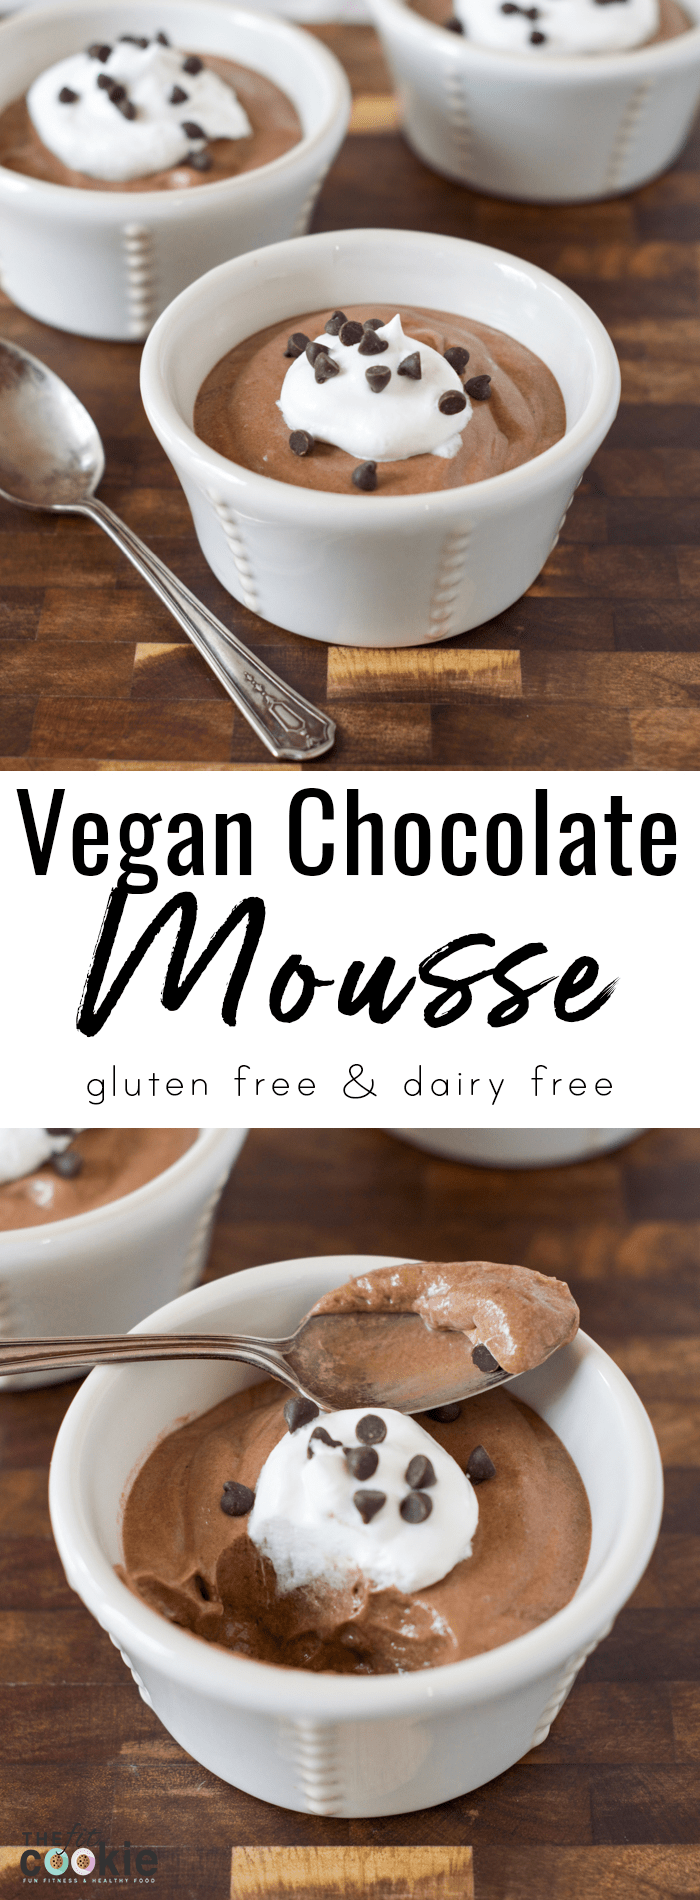 Based on my vegan lemon mousse recipe, I made this delicious Vegan Chocolate Mousse for chocolate lovers! This mousse is allergy friendly and is lower in sugar than other chocolate mousse recipes. Enjoy!! - @TheFitCookie #chocolate #vegan #glutenfree